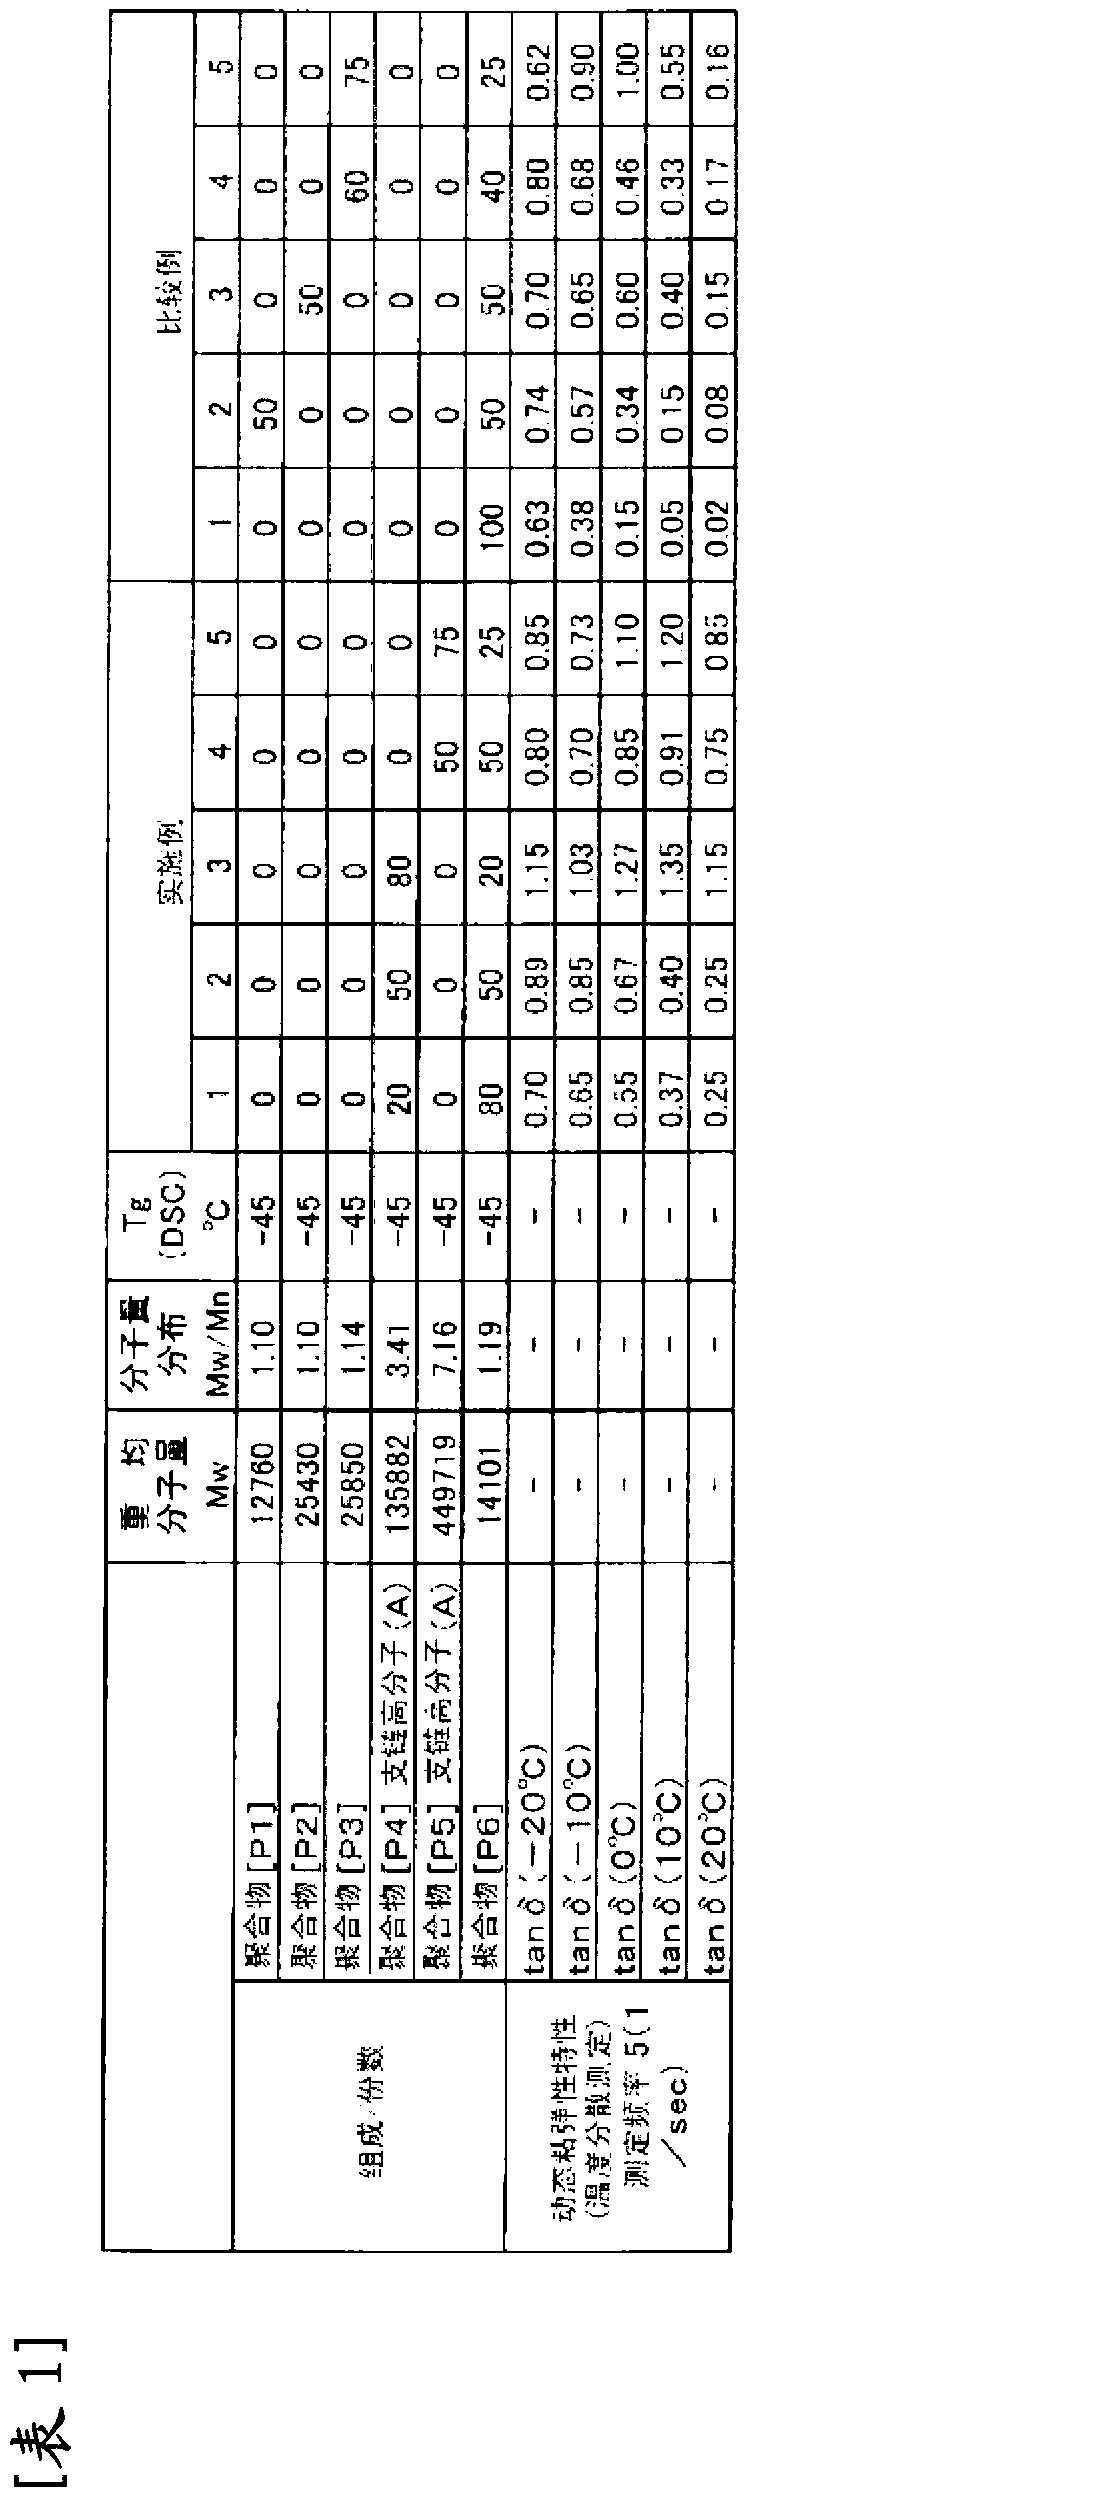 Composition containing branched polymer for vibration-damping material